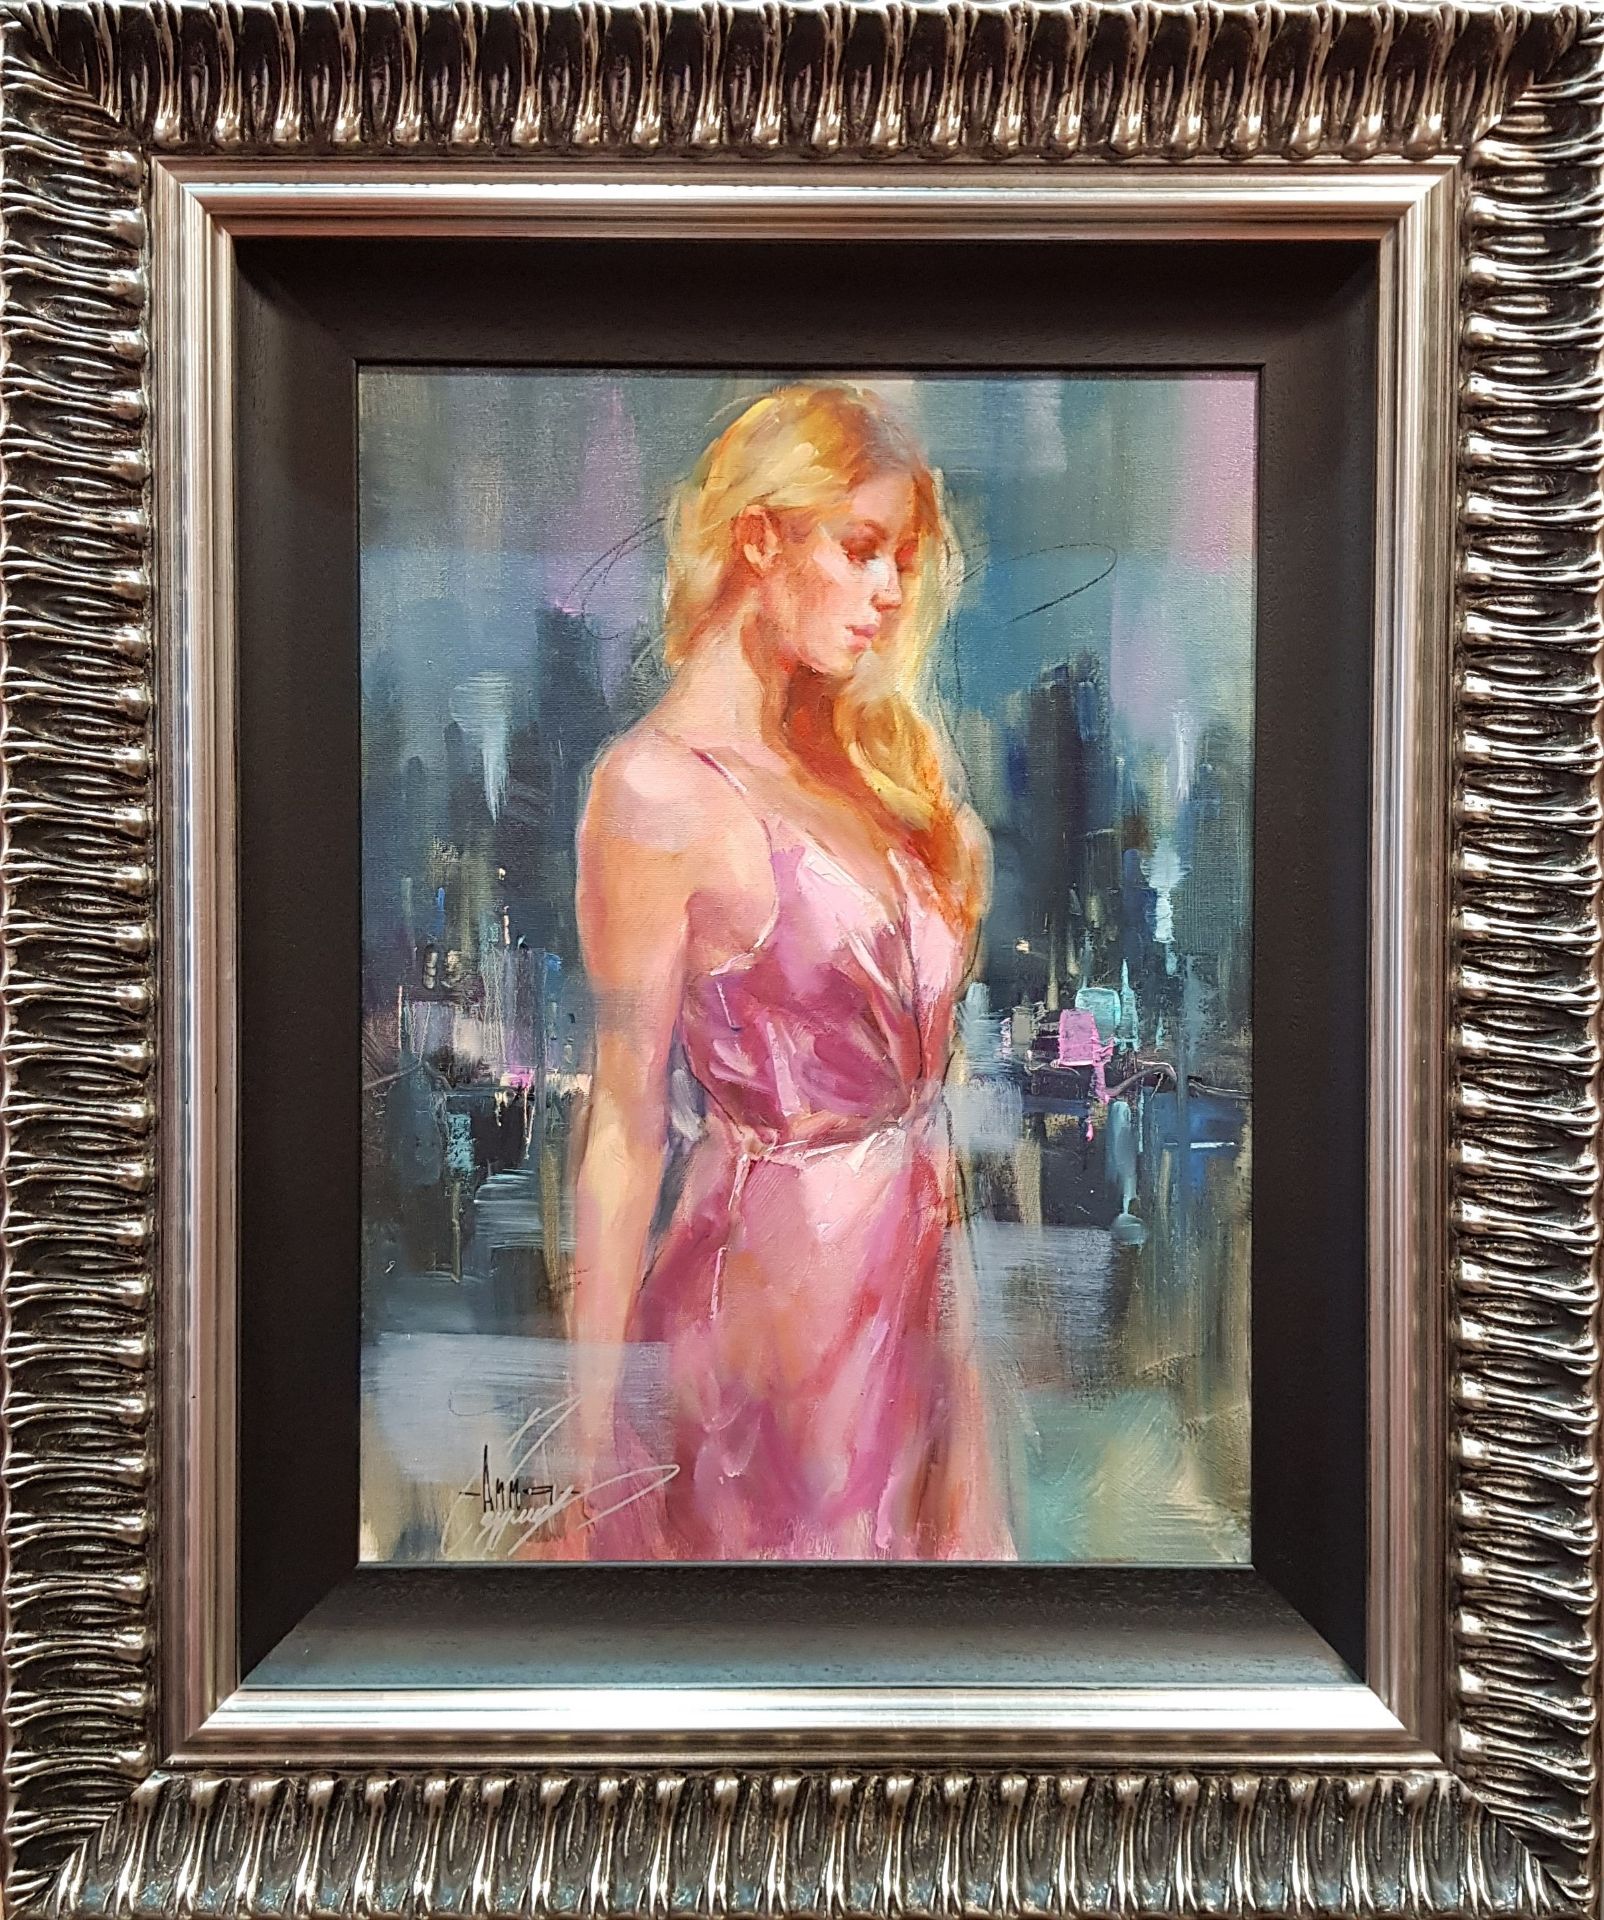 ANNA RAZUMOVSKAYA OIL ON CANVAS TITLED: FOR A WHILE 1 IN A SILVER COLOURED FRAME SIZE 93CM X